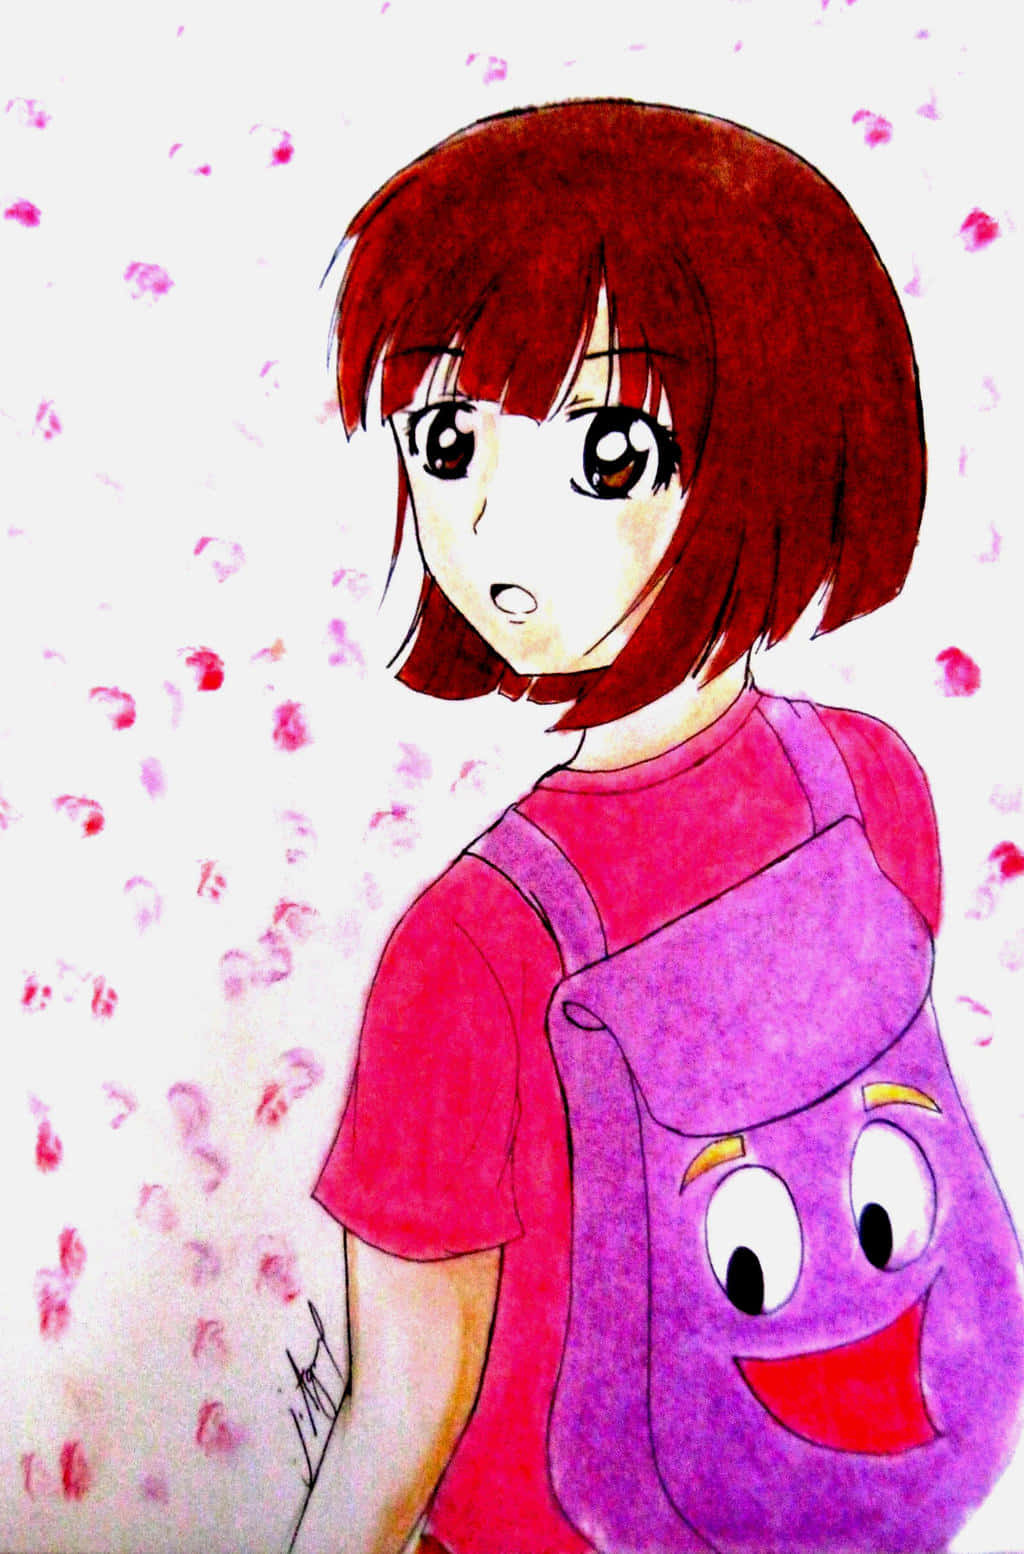 A Drawing Of A Girl With A Backpack